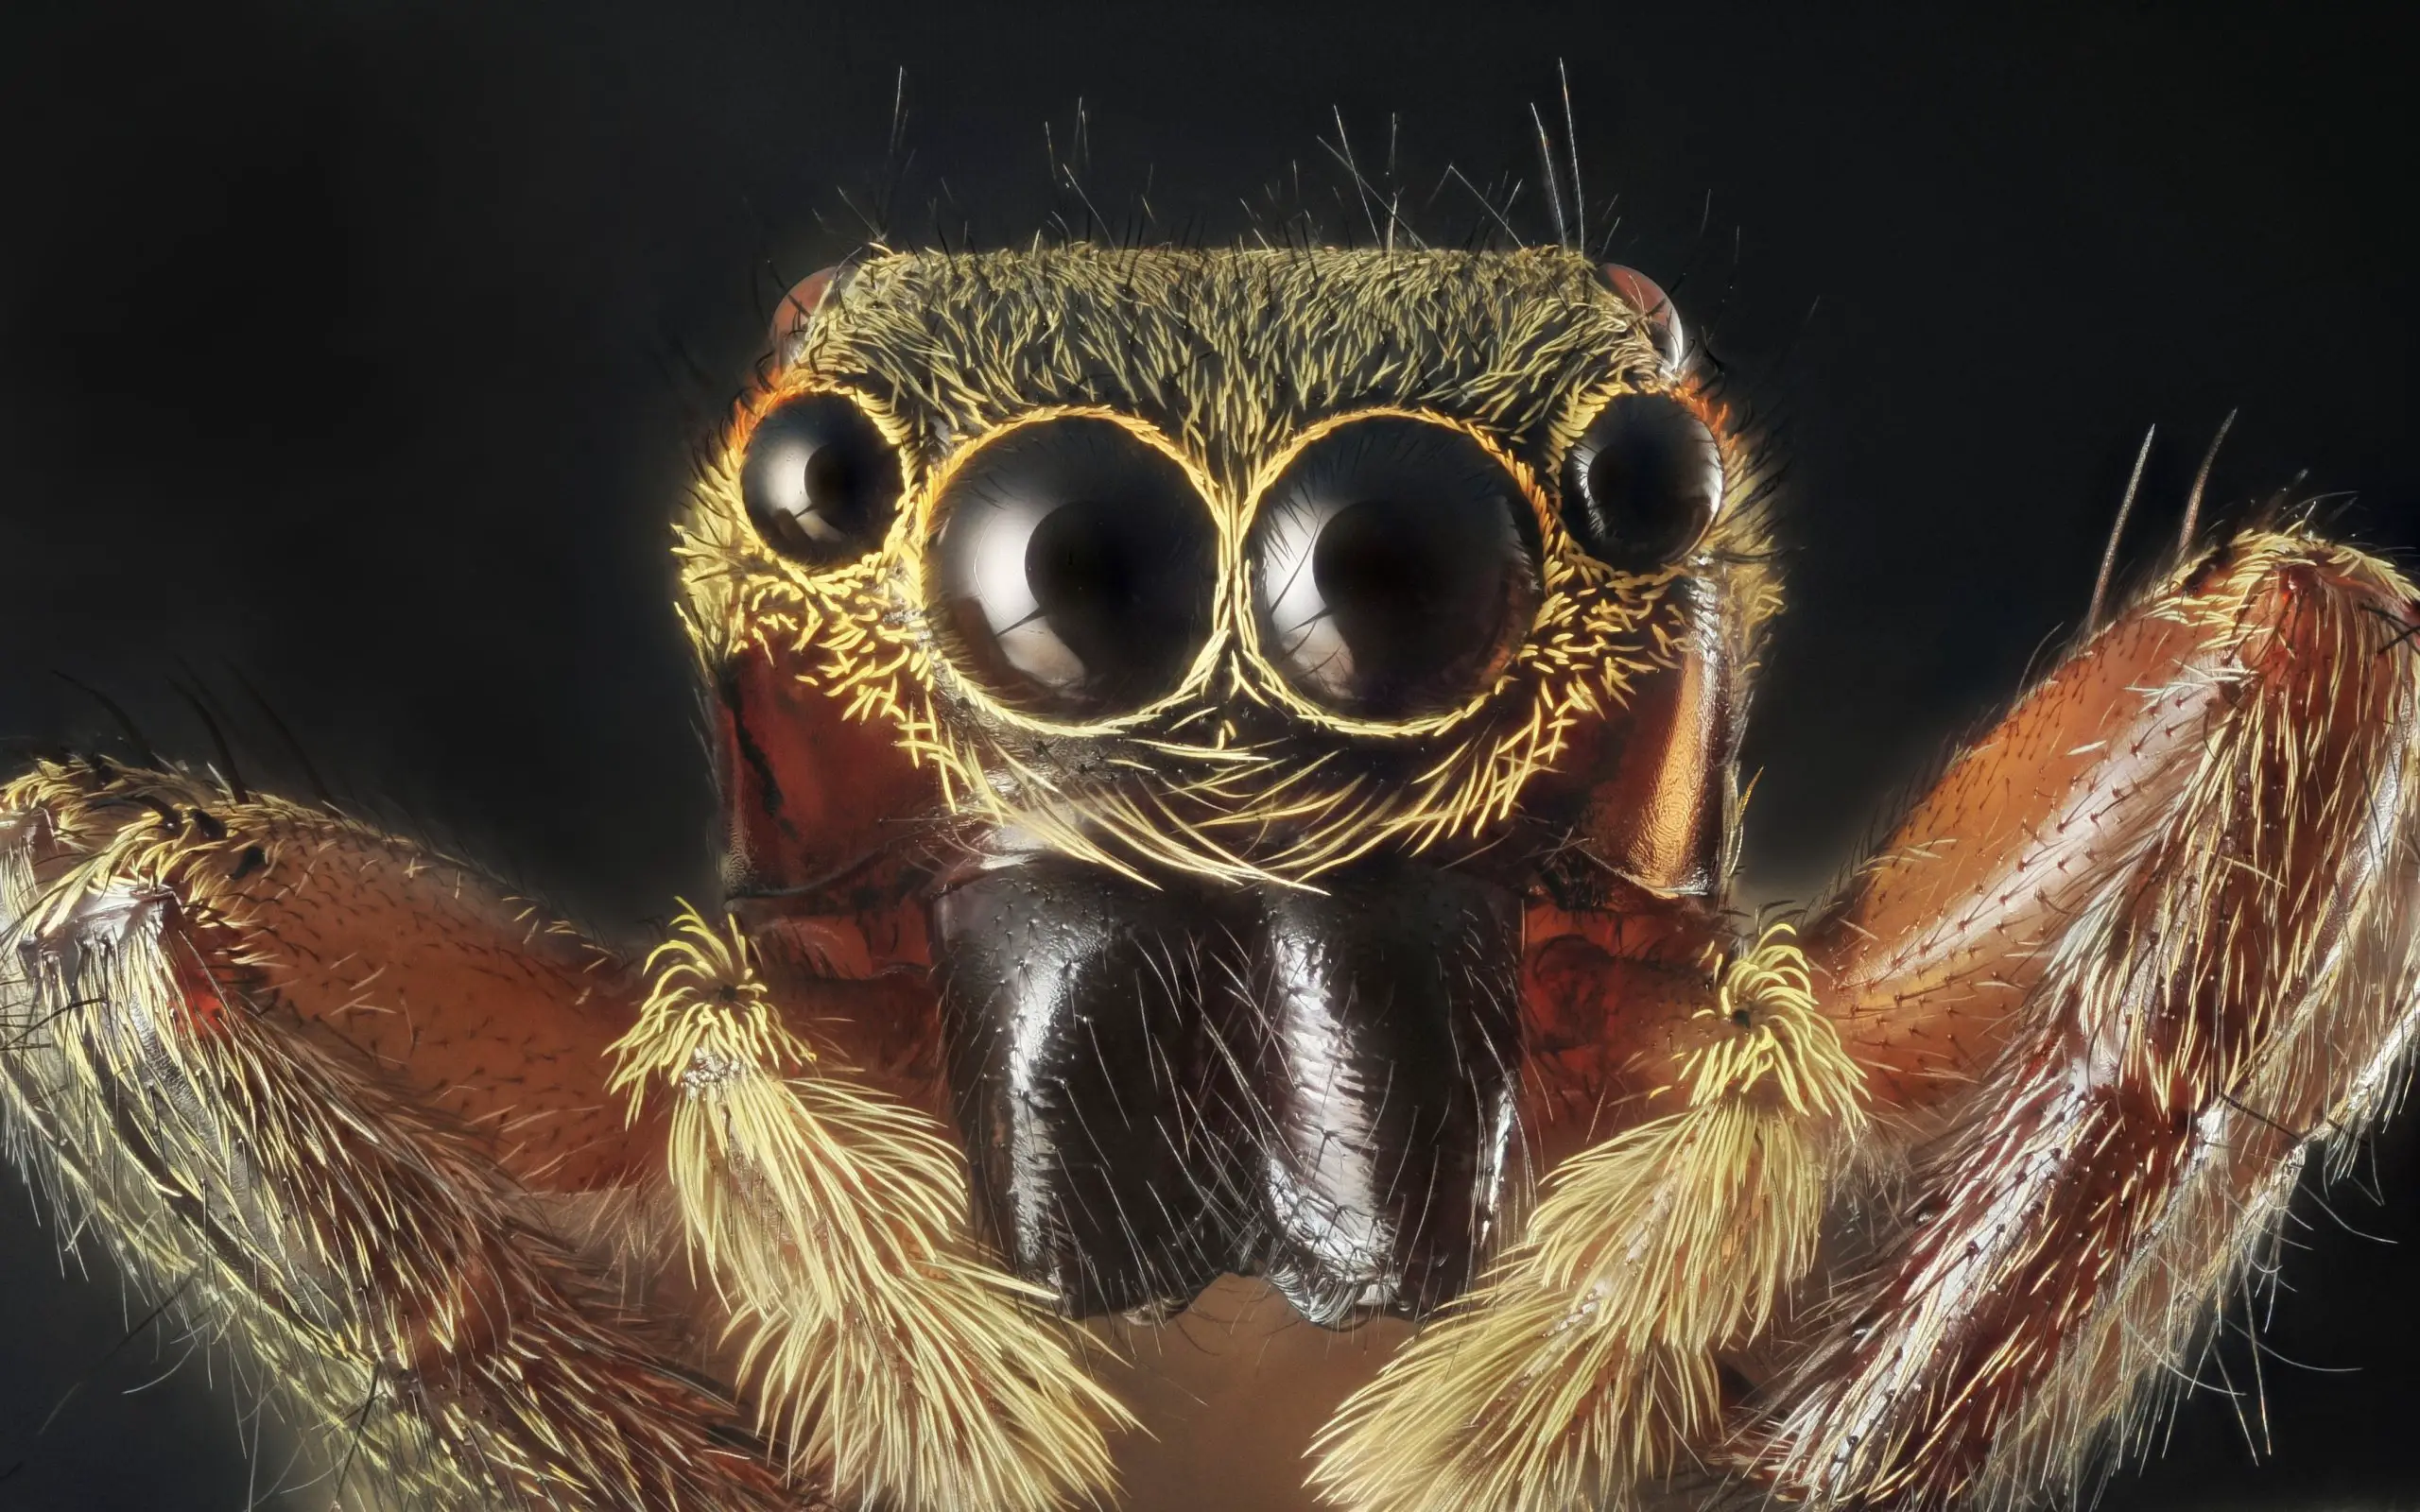 spider portrait with 7x magnification and full depth of view